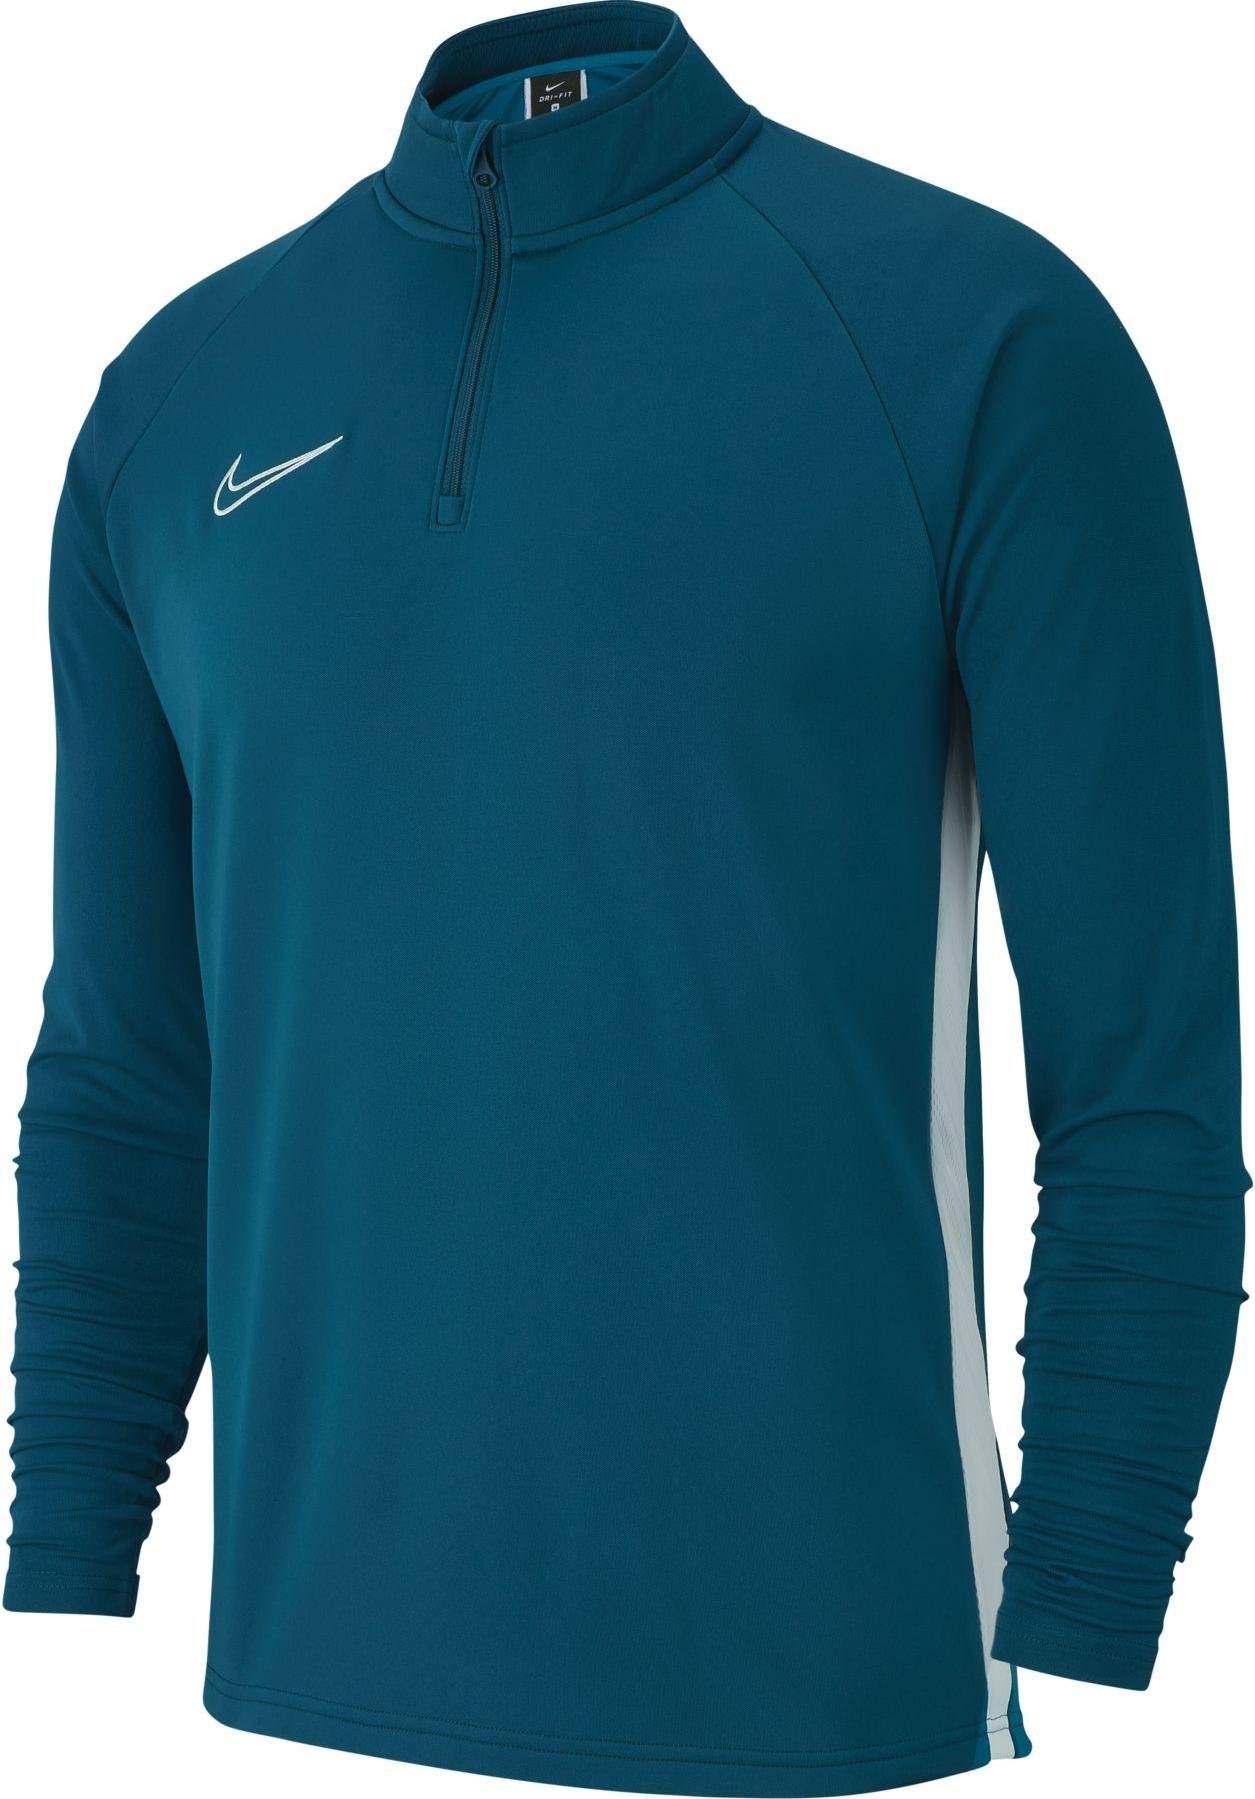 Mikina Nike M NK DRY ACDMY19 DRIL TOP